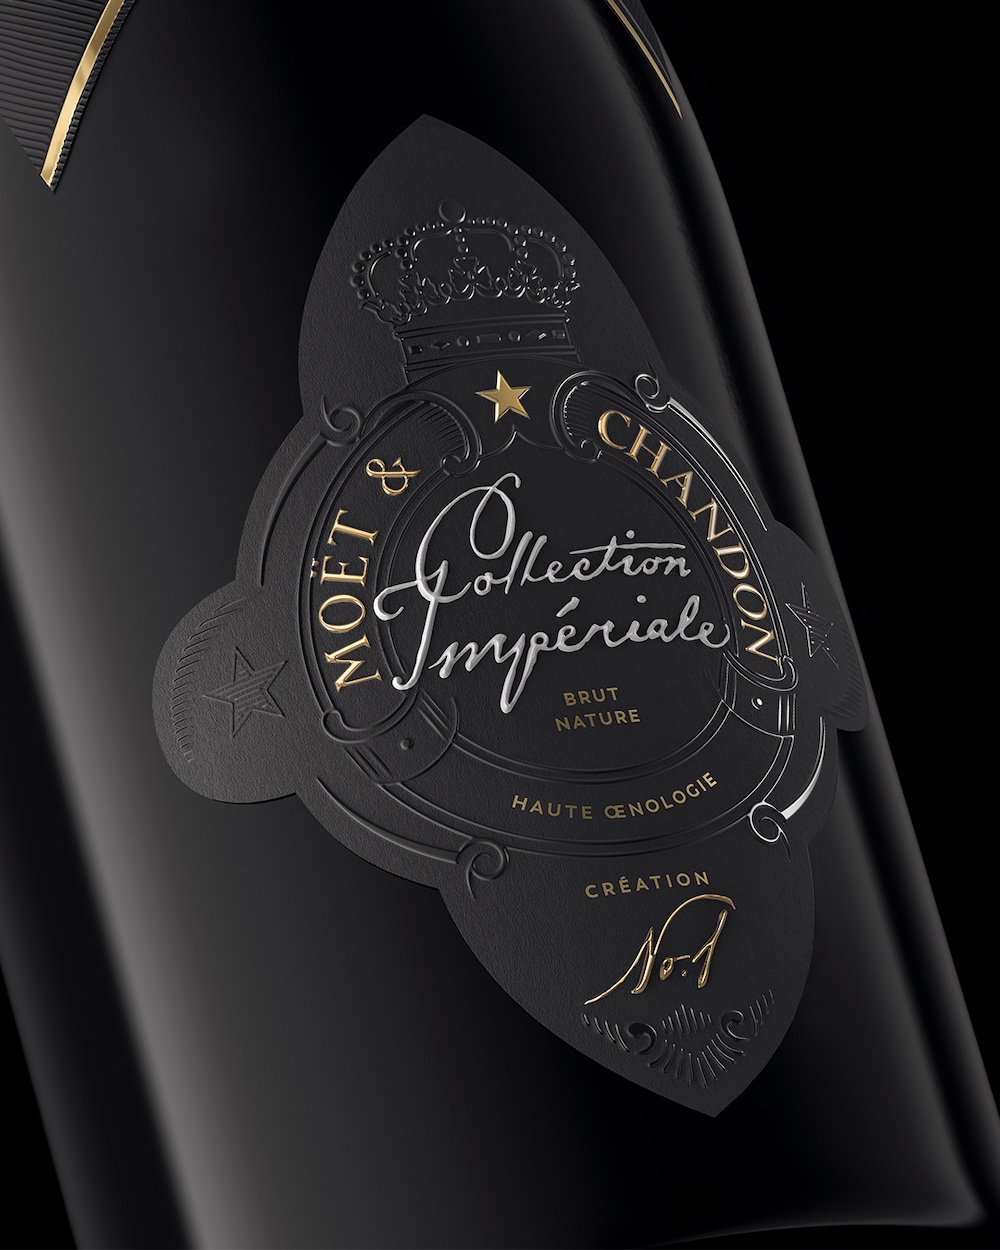 Moet and Chandon's Collection Imperiale No. 1